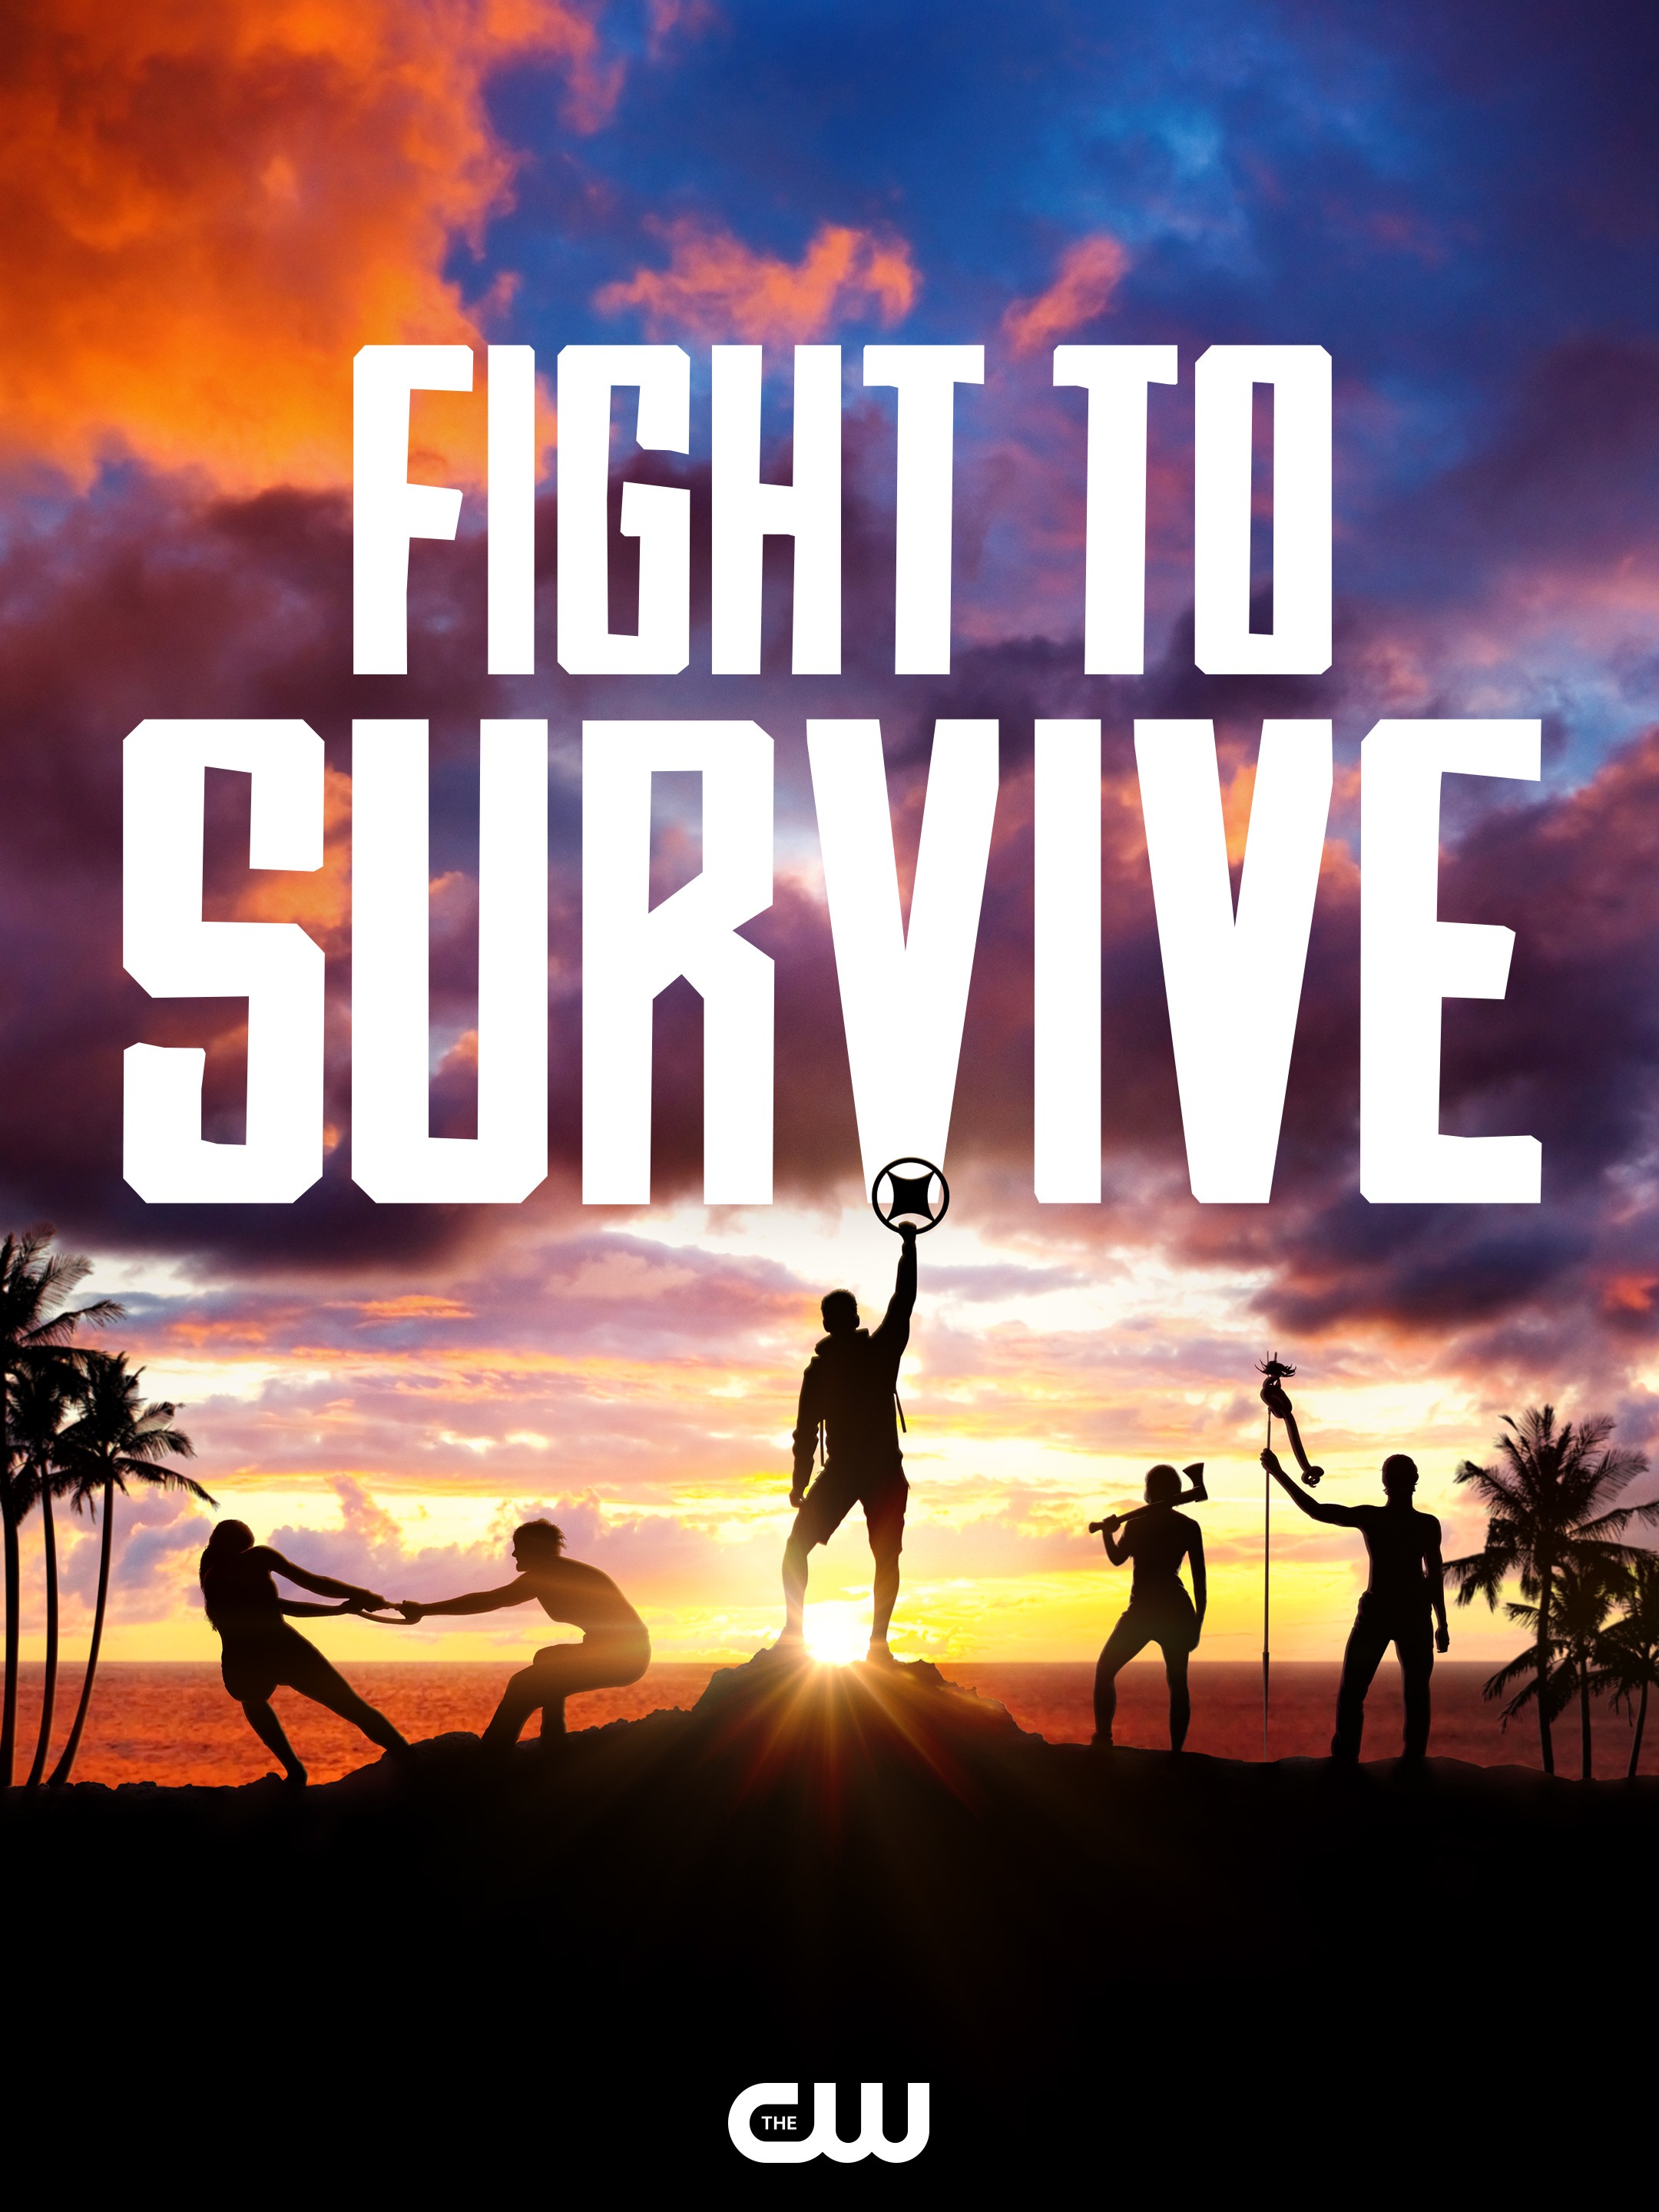 Survive the Nights: Survival edition (by Horrible Tomato, enhanced